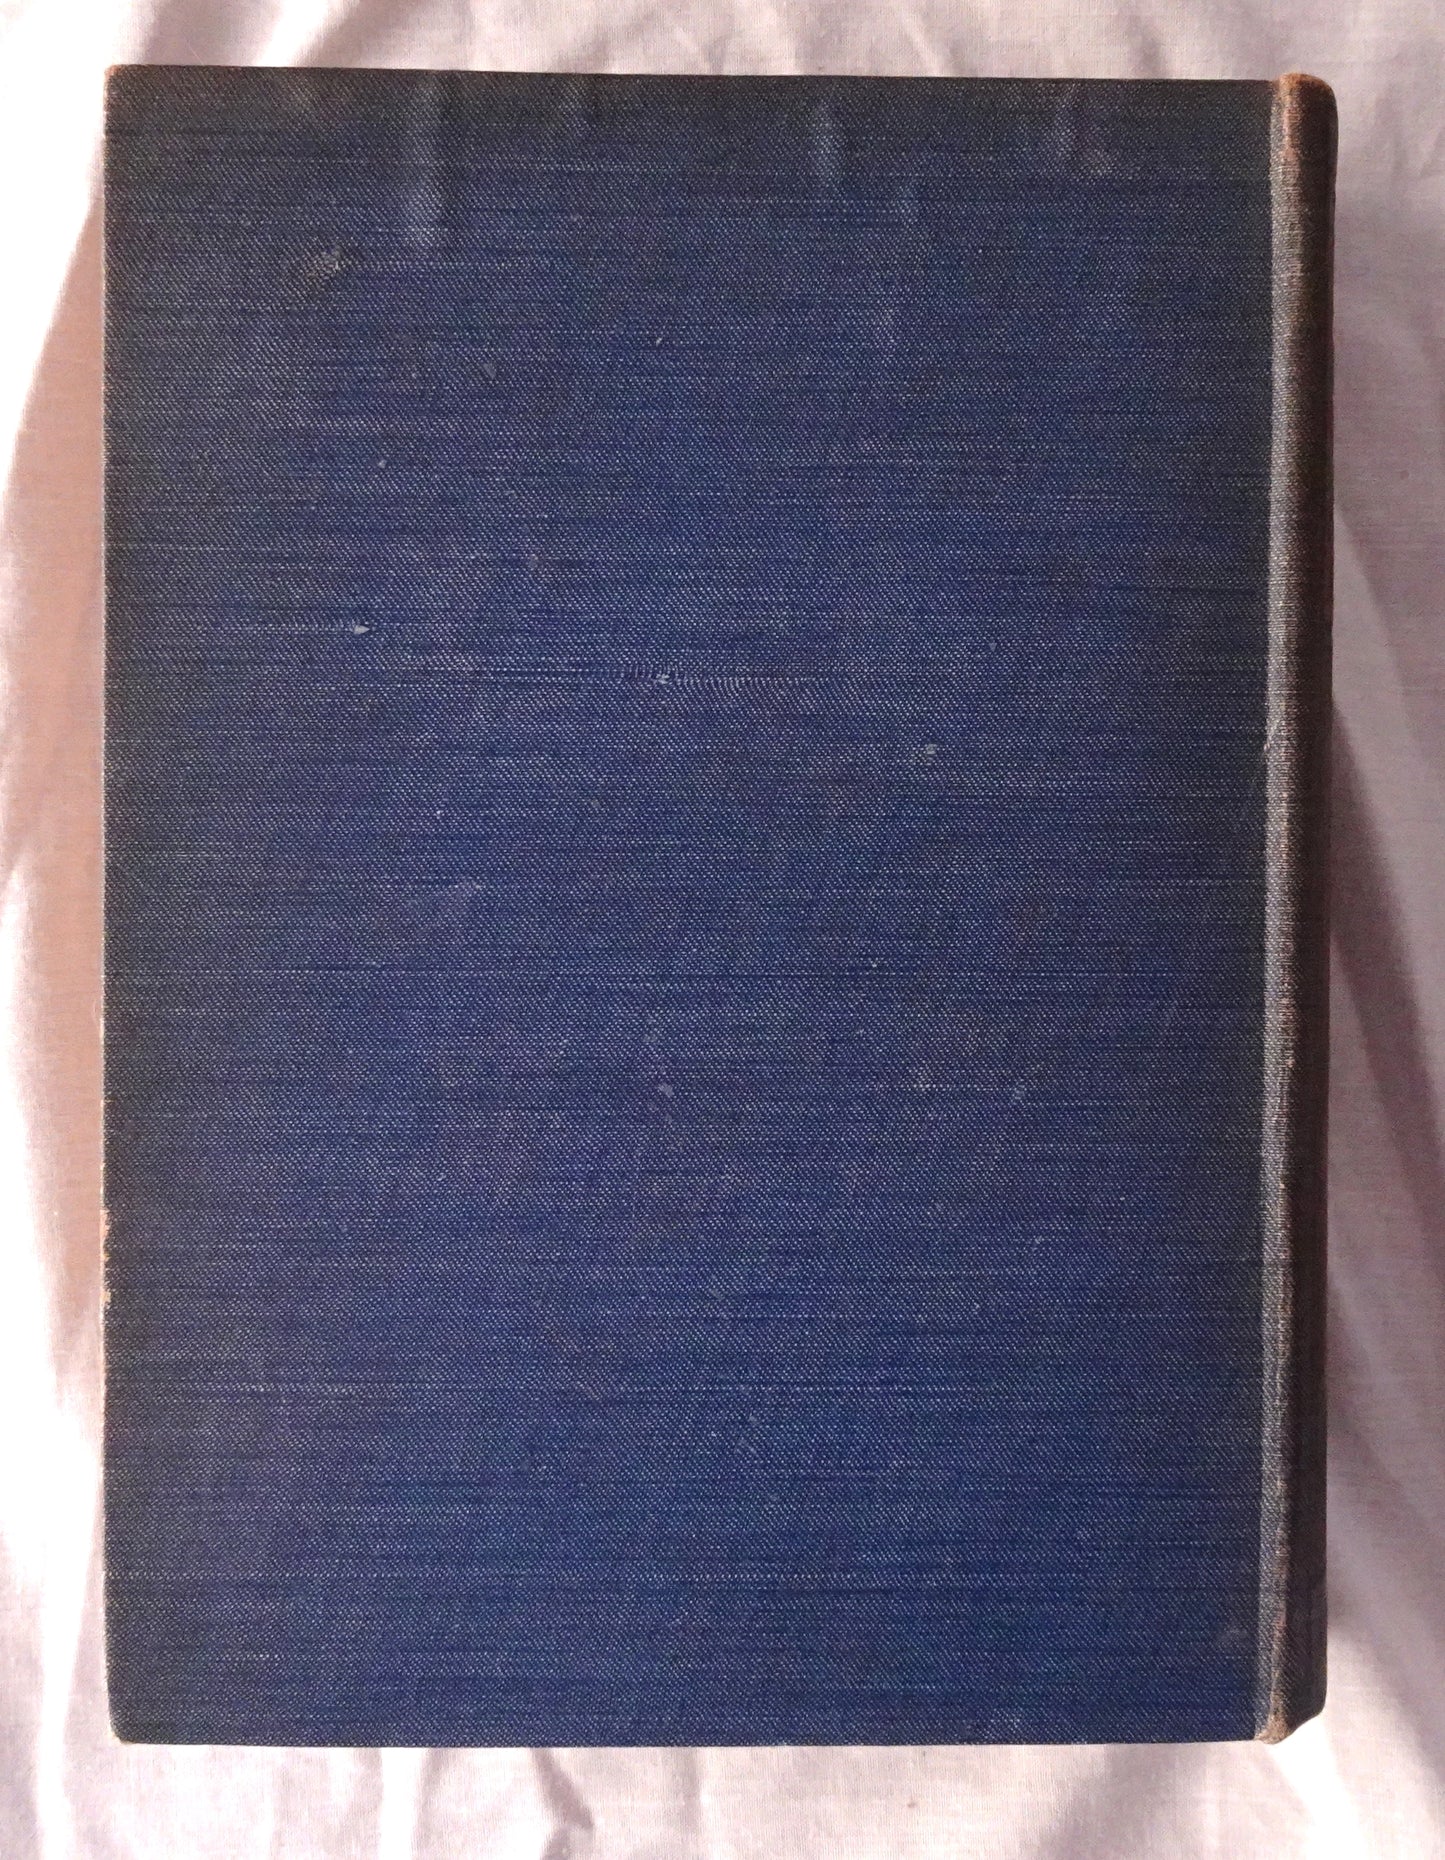 Oxford by John Fulleylove and Edward Thomas